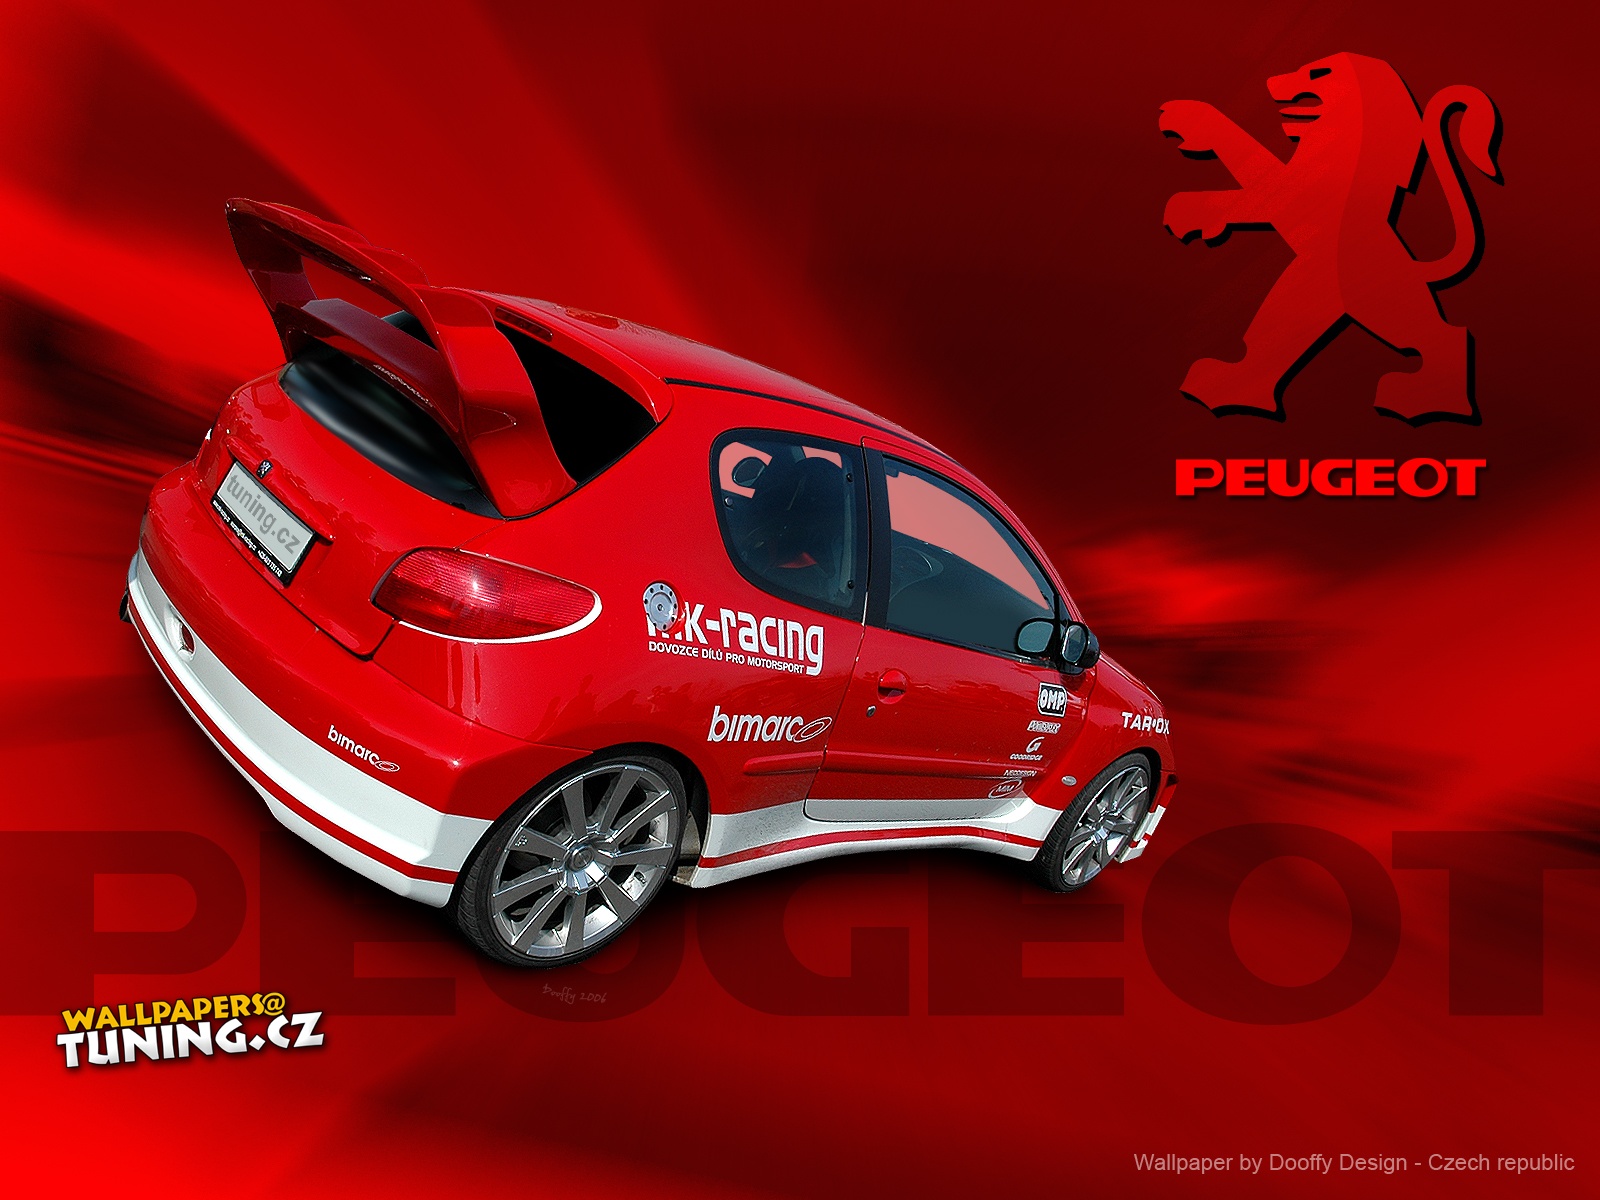 Peugeot 206 Tuning - Peugeot & Cars Background Wallpapers on